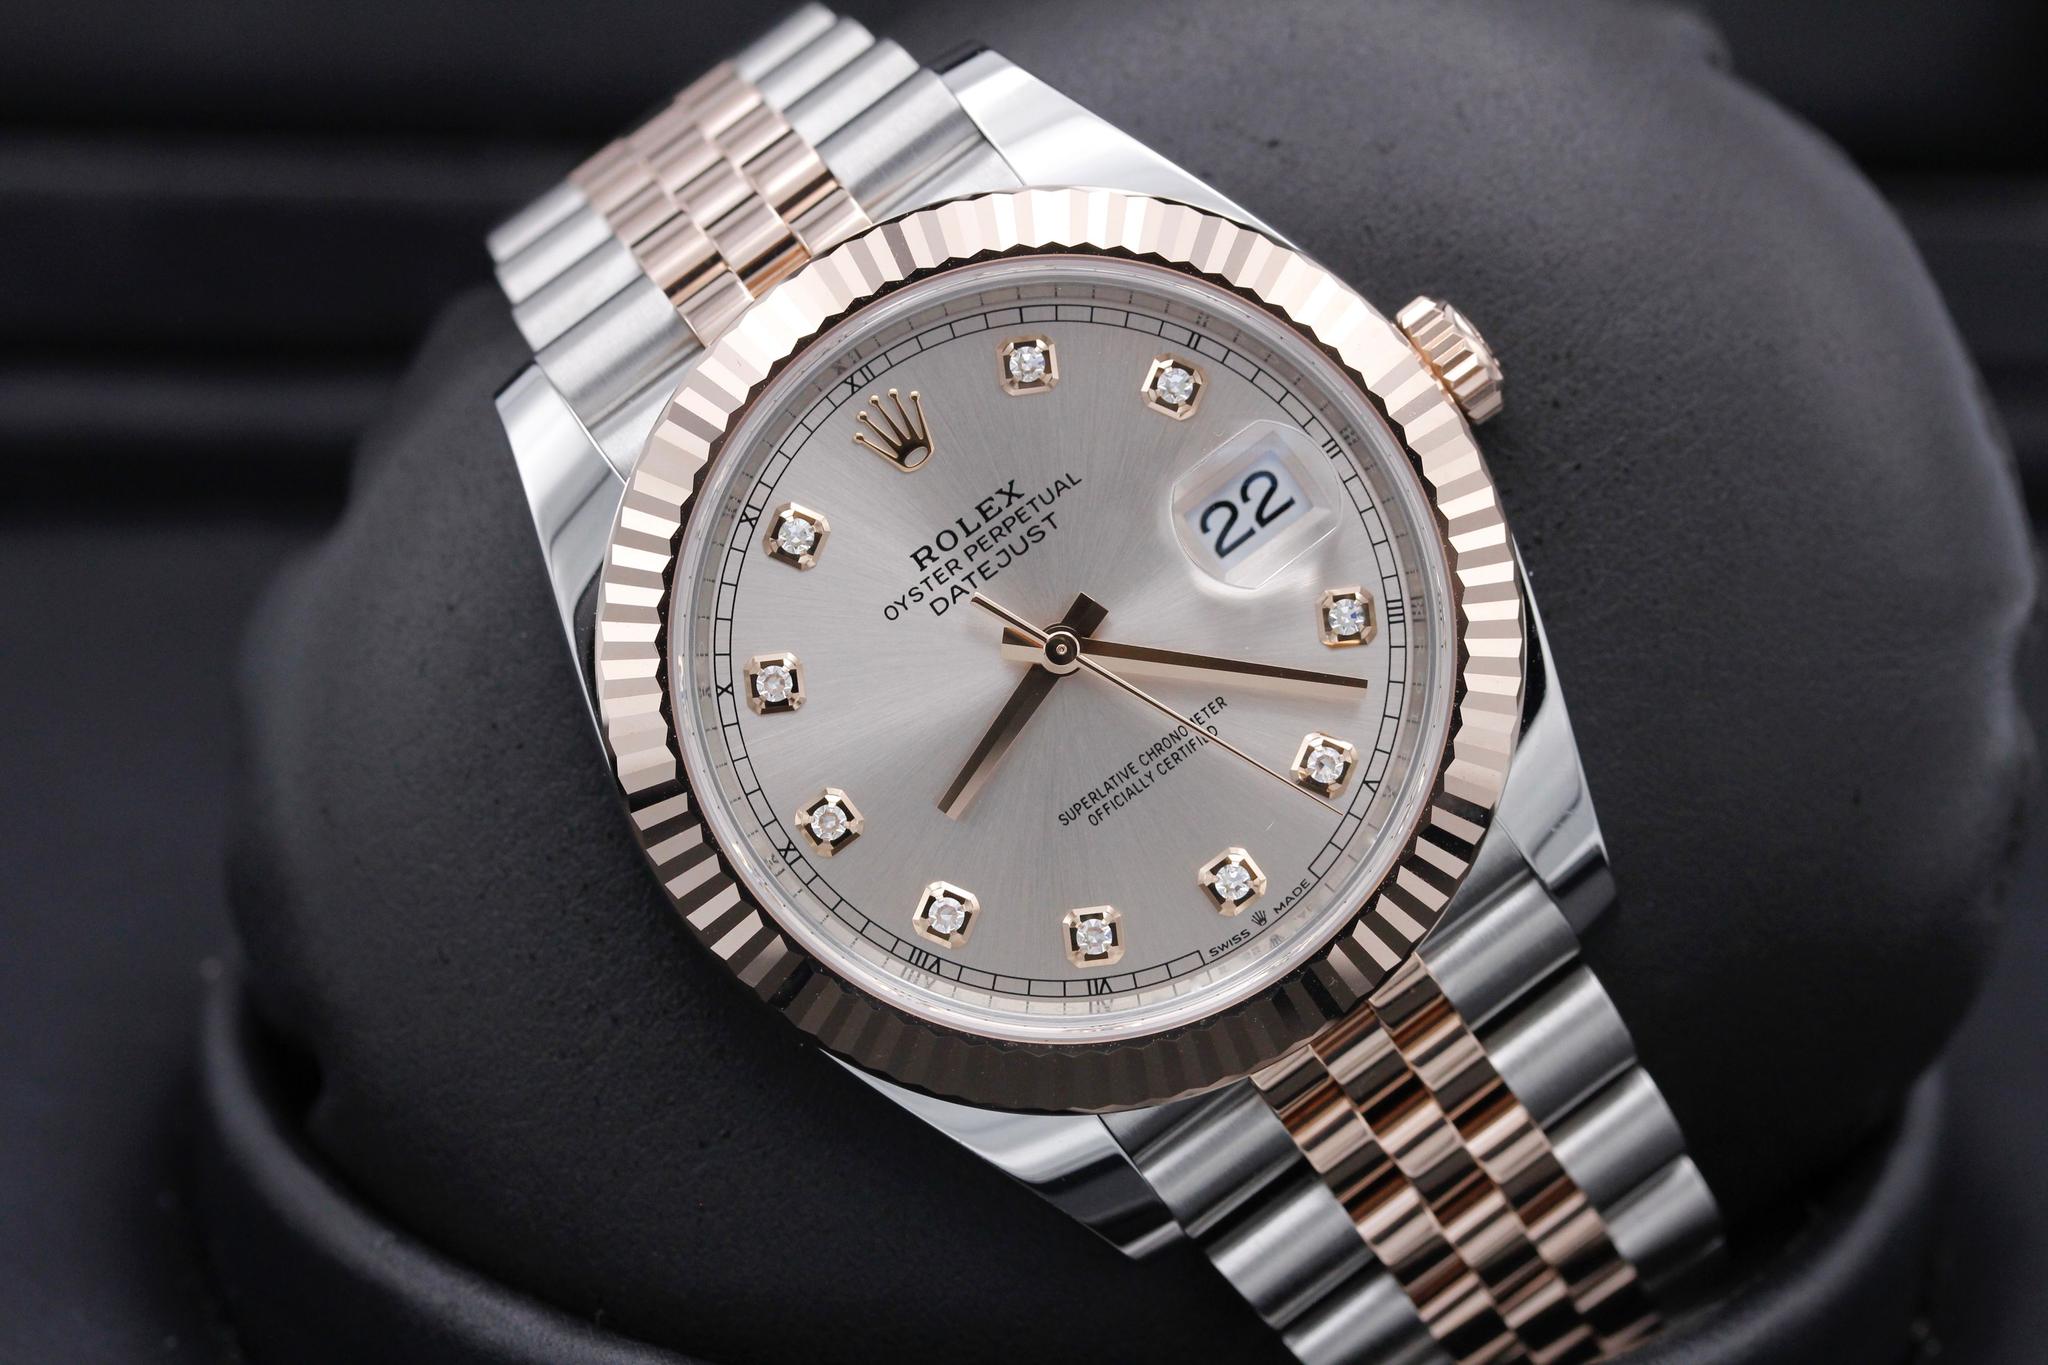 Rolex Datejust 41mm 126331 Stainless Steel & Rose Gold Watch Grey